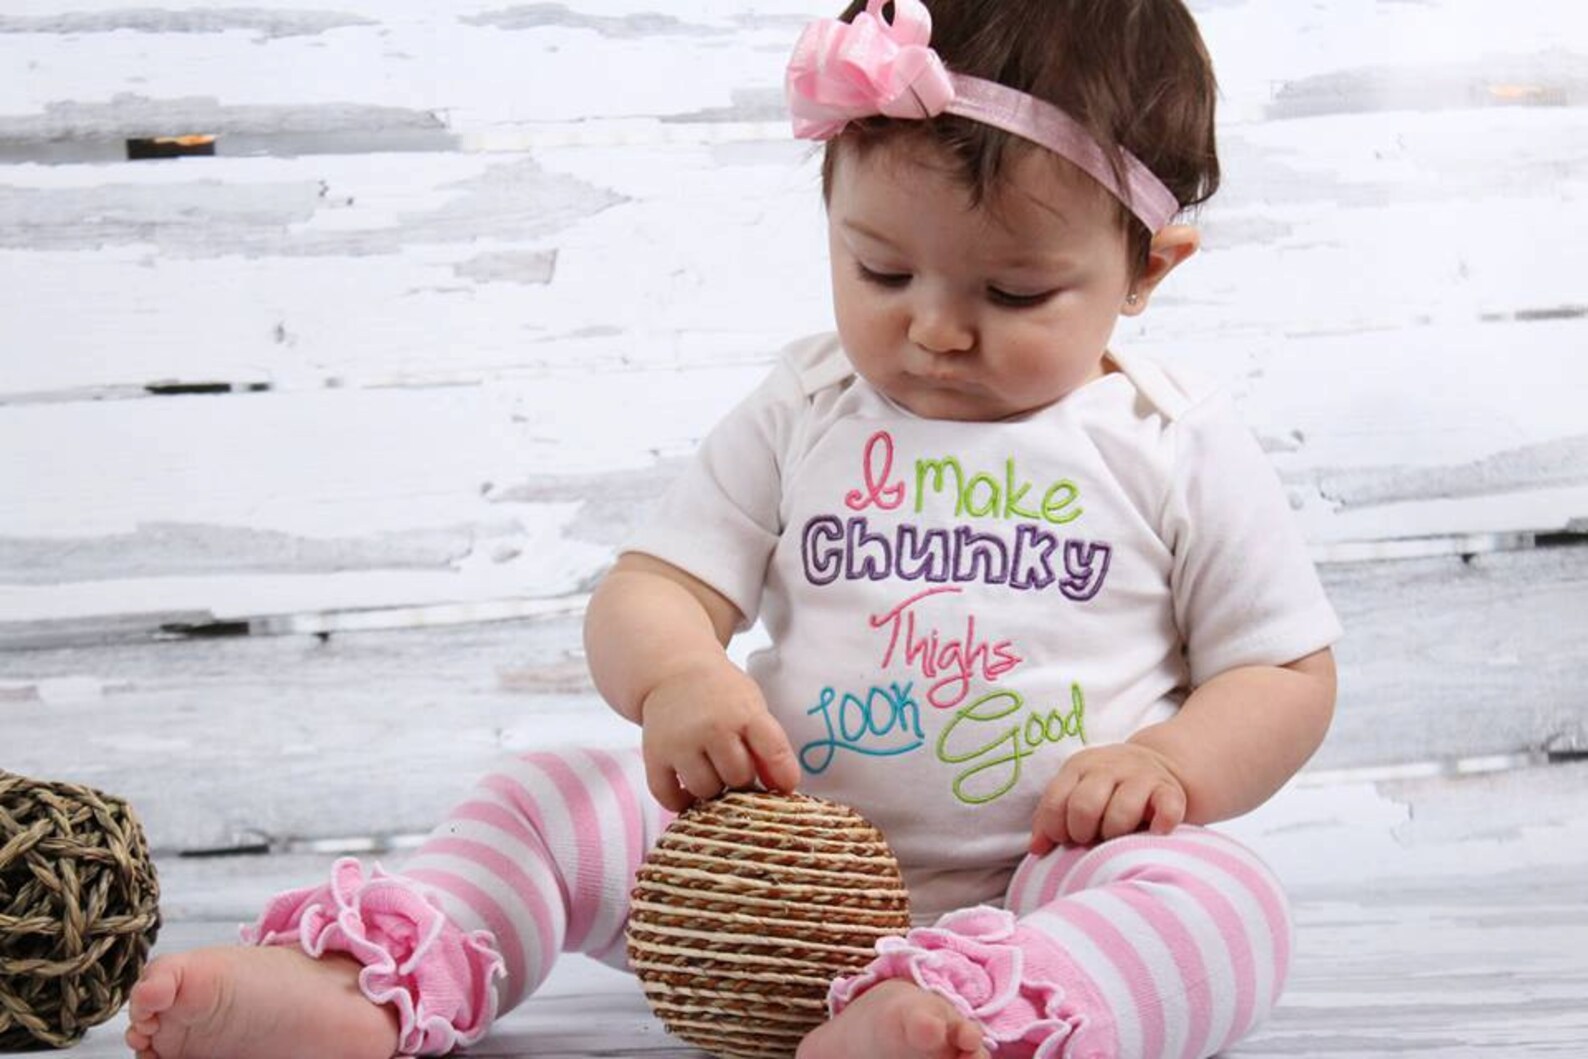 Create Baby Bodysuits for a Baby Shower or Gift